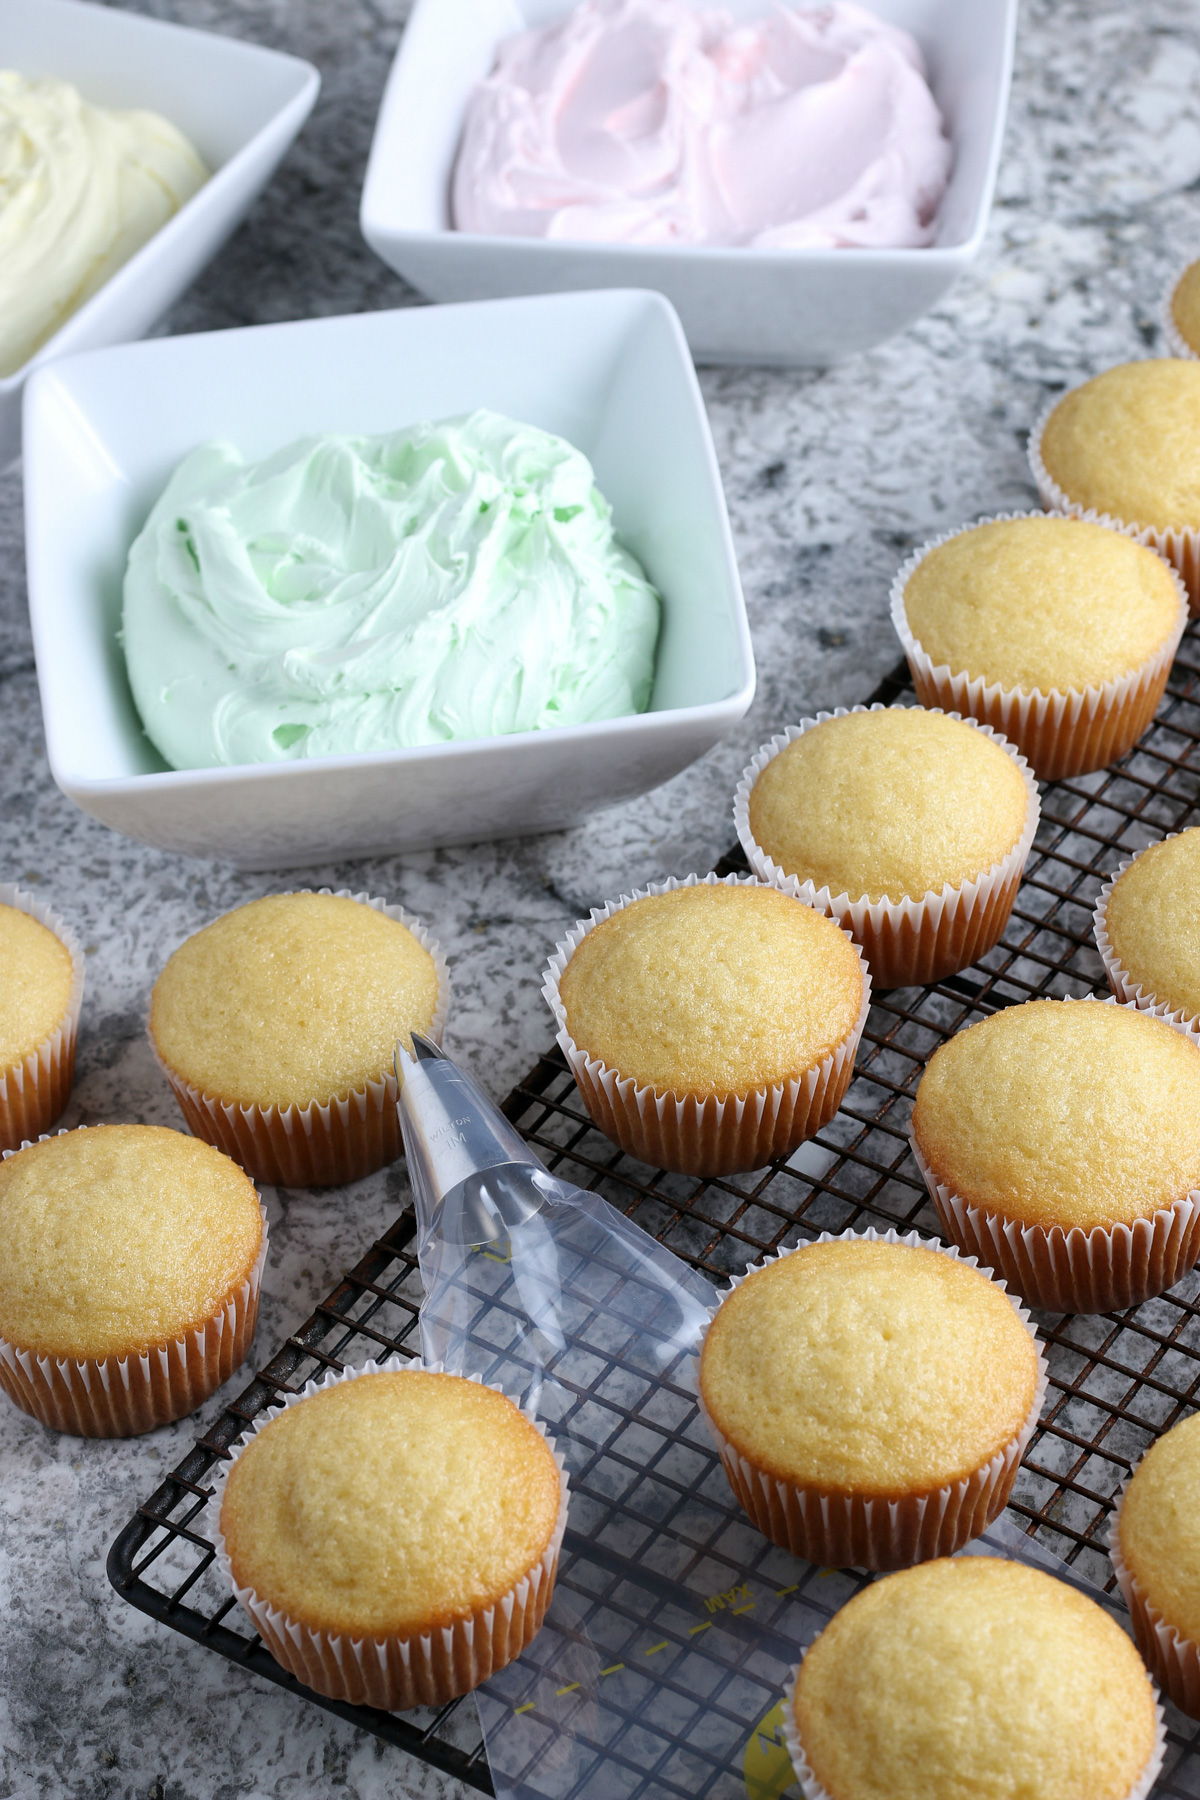 baked vanilla gluten-free cupcakes with green buttercream frosting and pastry bag on wire rack